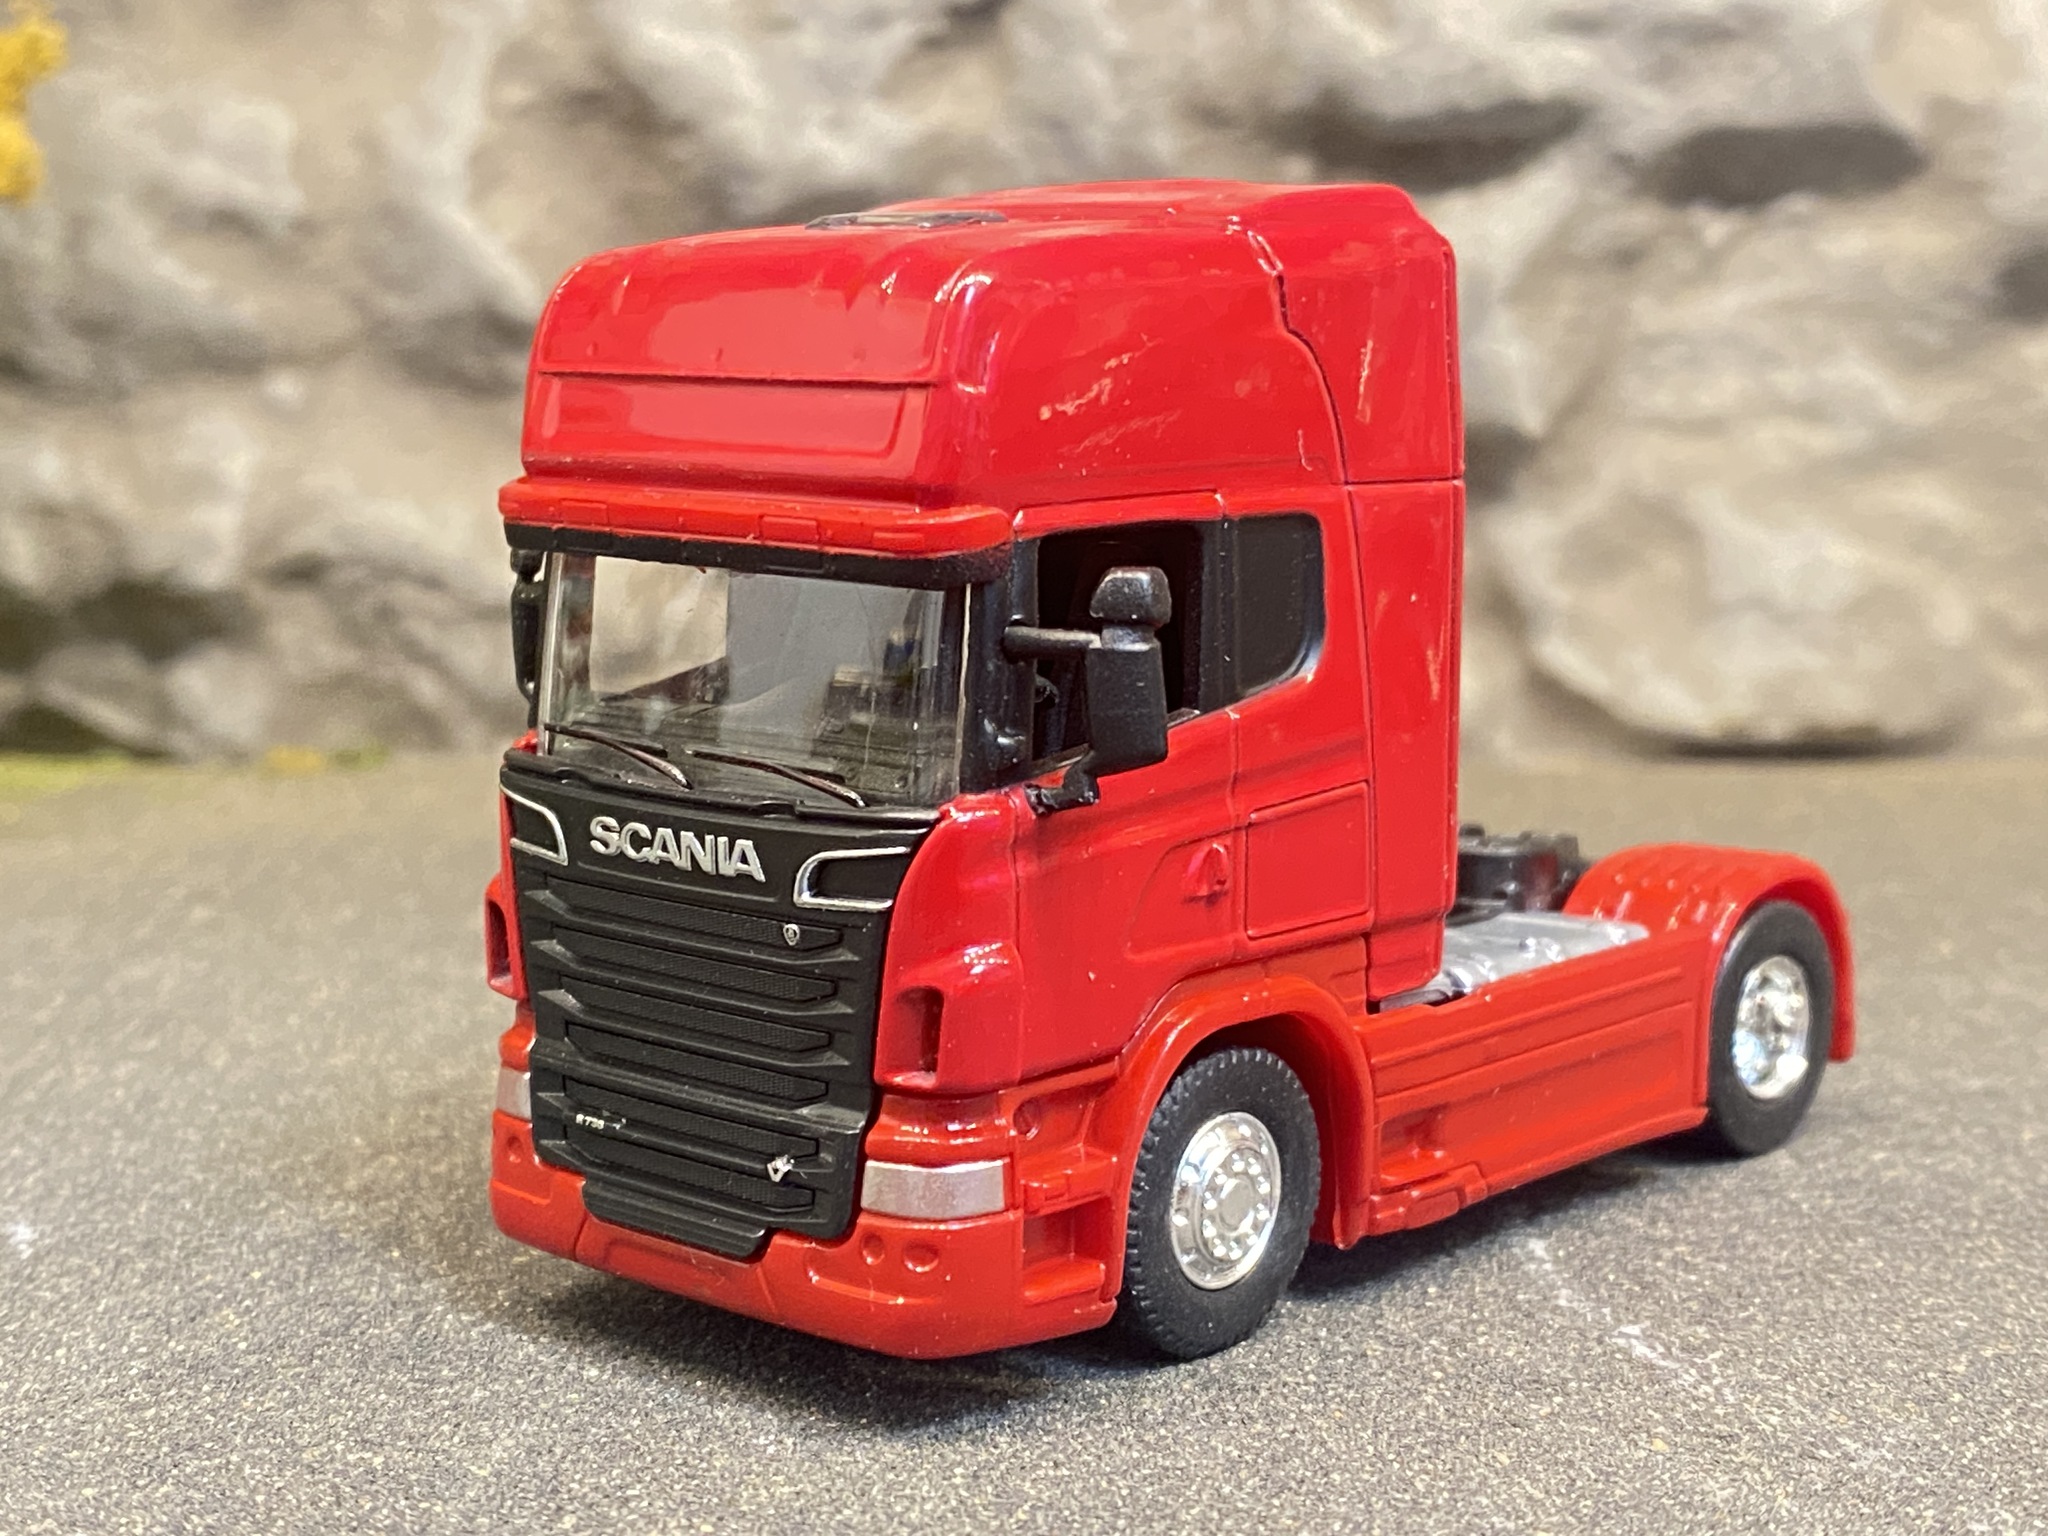 Skala 1/64 - Scania V8 R730 tractor 2-axle, red fr Welly